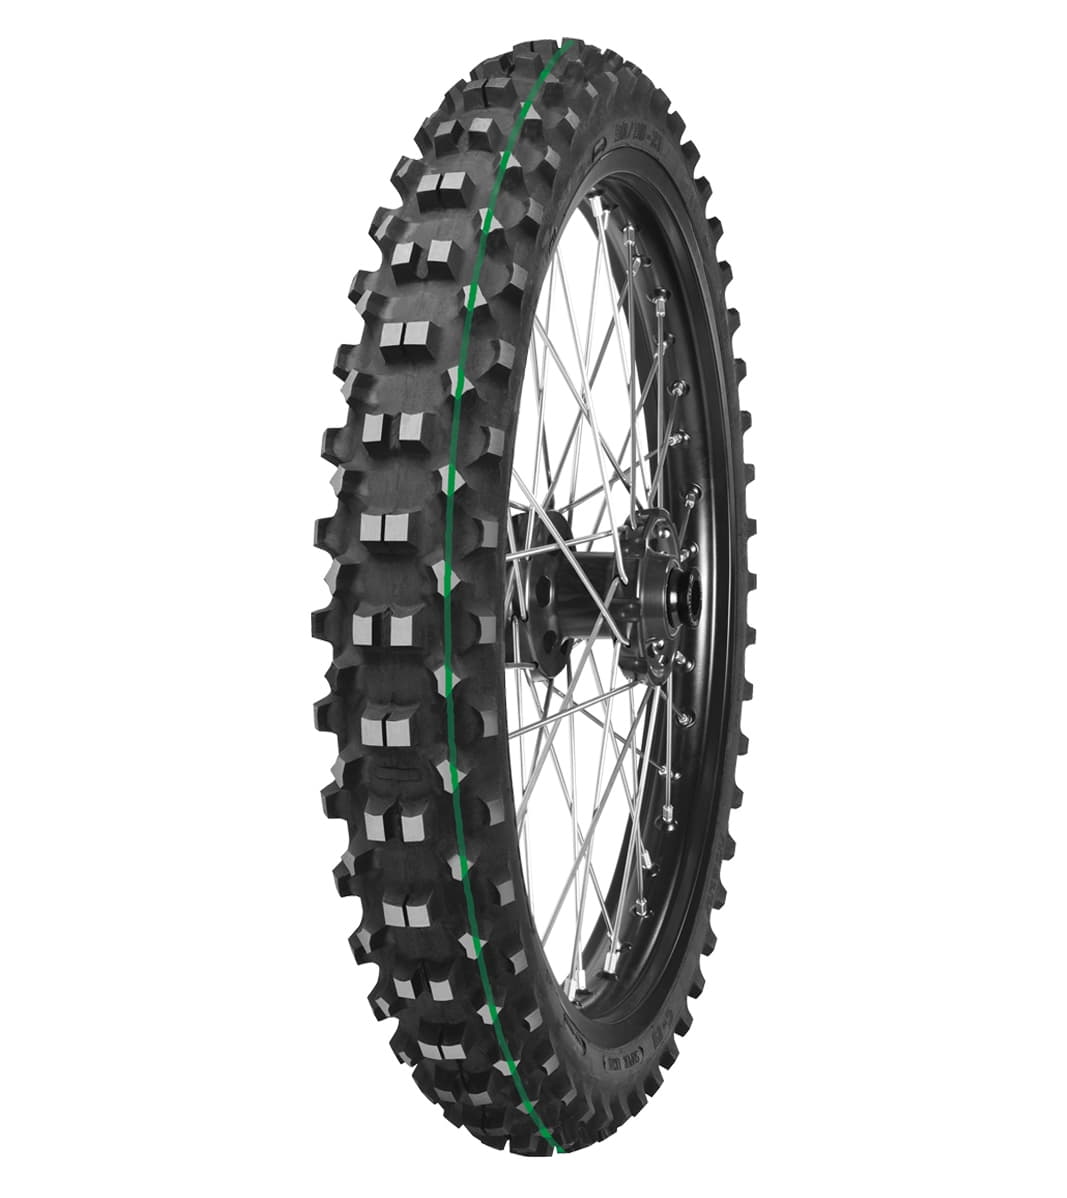 Mitas C-19 EAGLE 90/90-21 Enduro Competition Off-Road SUPER LIGHT 54R Green Tube Front Tire Motorcycle Tires Mitas 